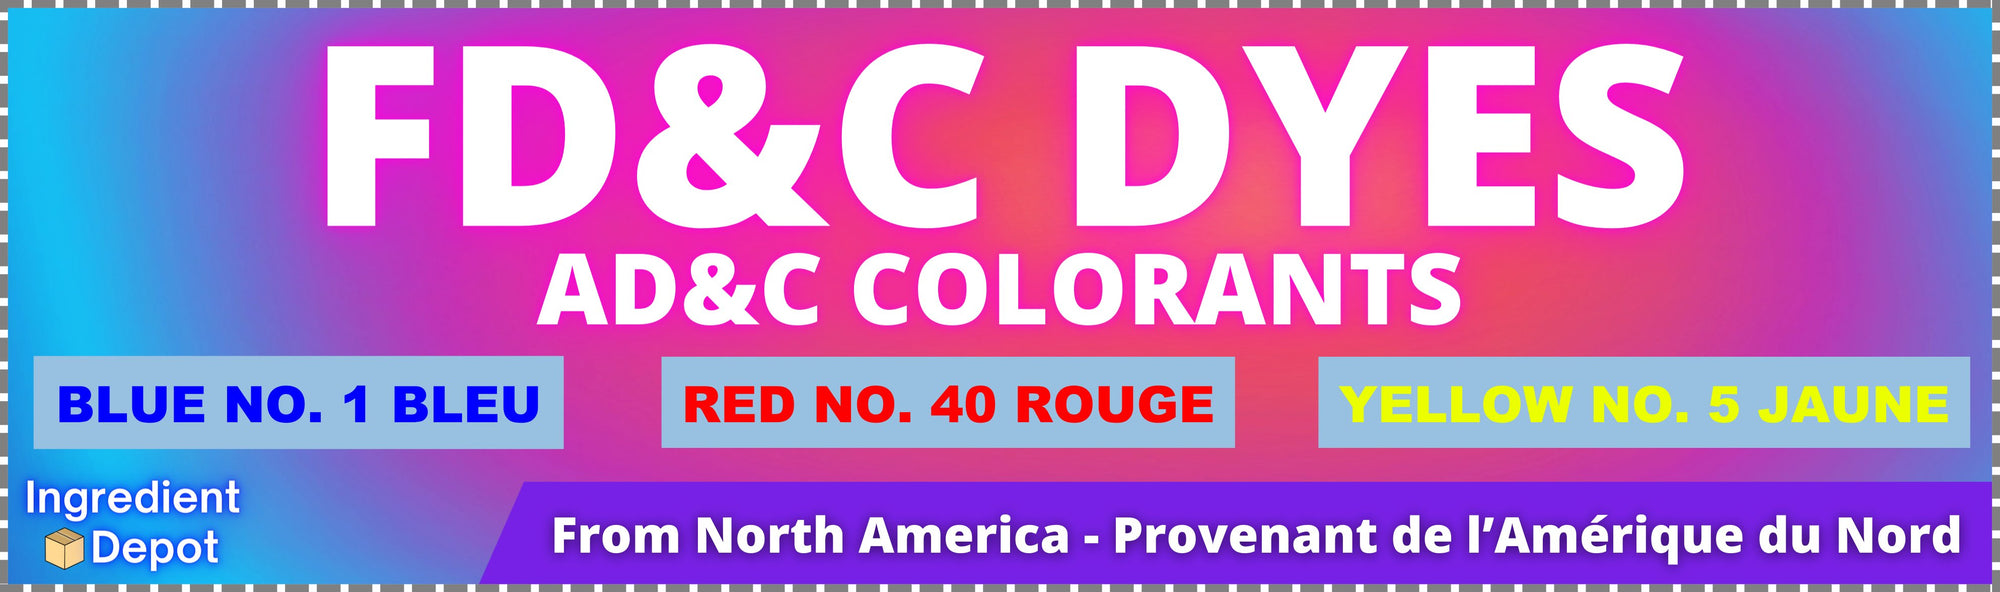 Ingredient Depot FDC Dyes Blue No. 1, Red No. 40 and Yellow No. 5